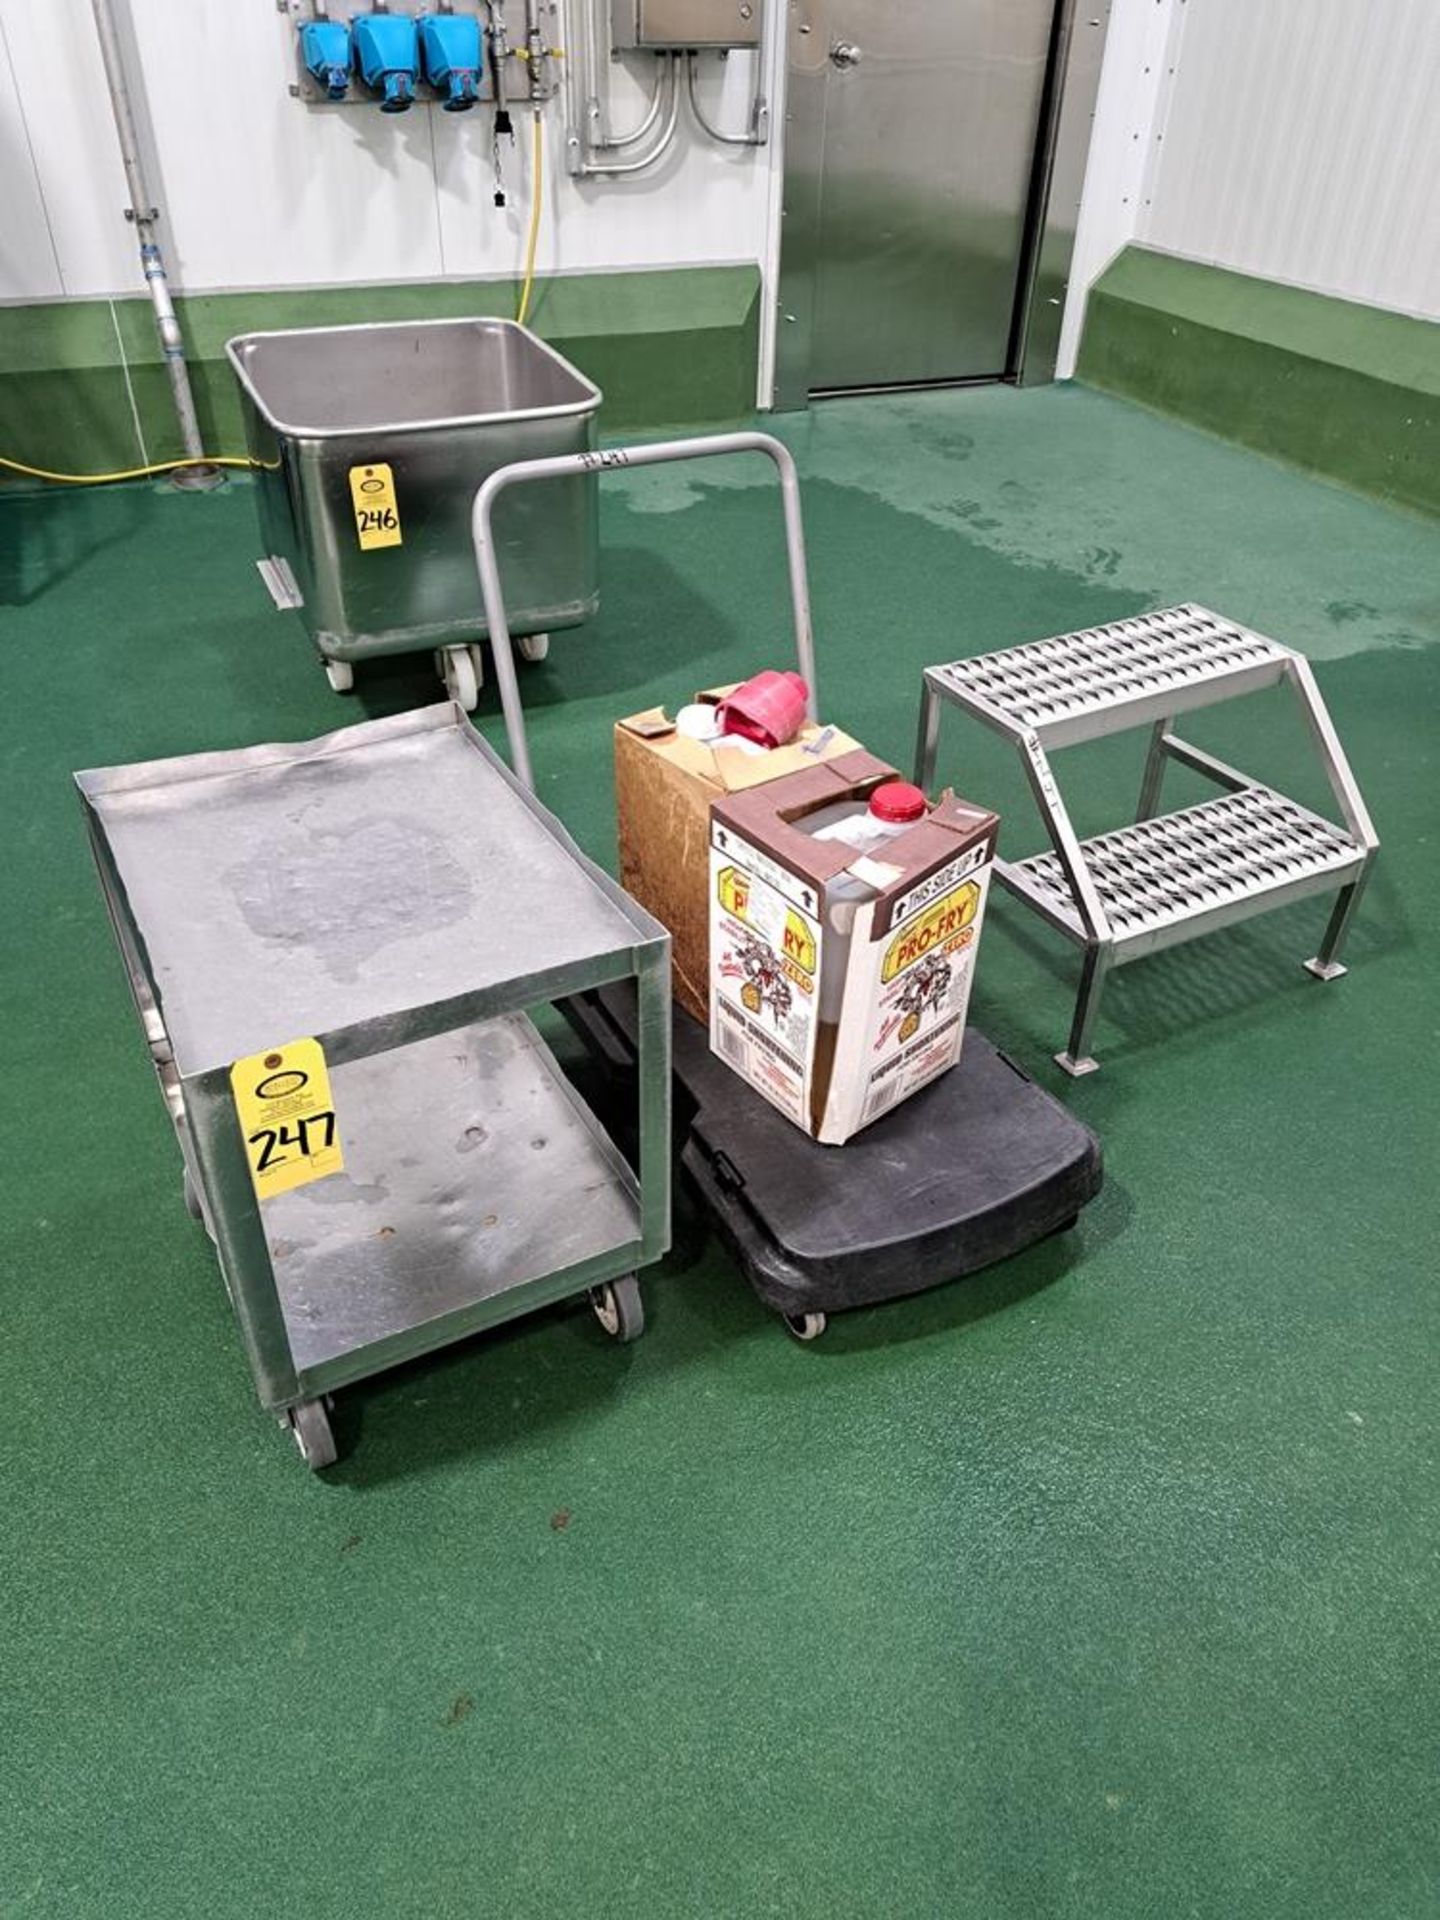 Lot (1) Stainless Steel Cart, 18" W X 24" L, (1) Cart, 24" W X 36" L, (1) Stainless Steel Stairs-